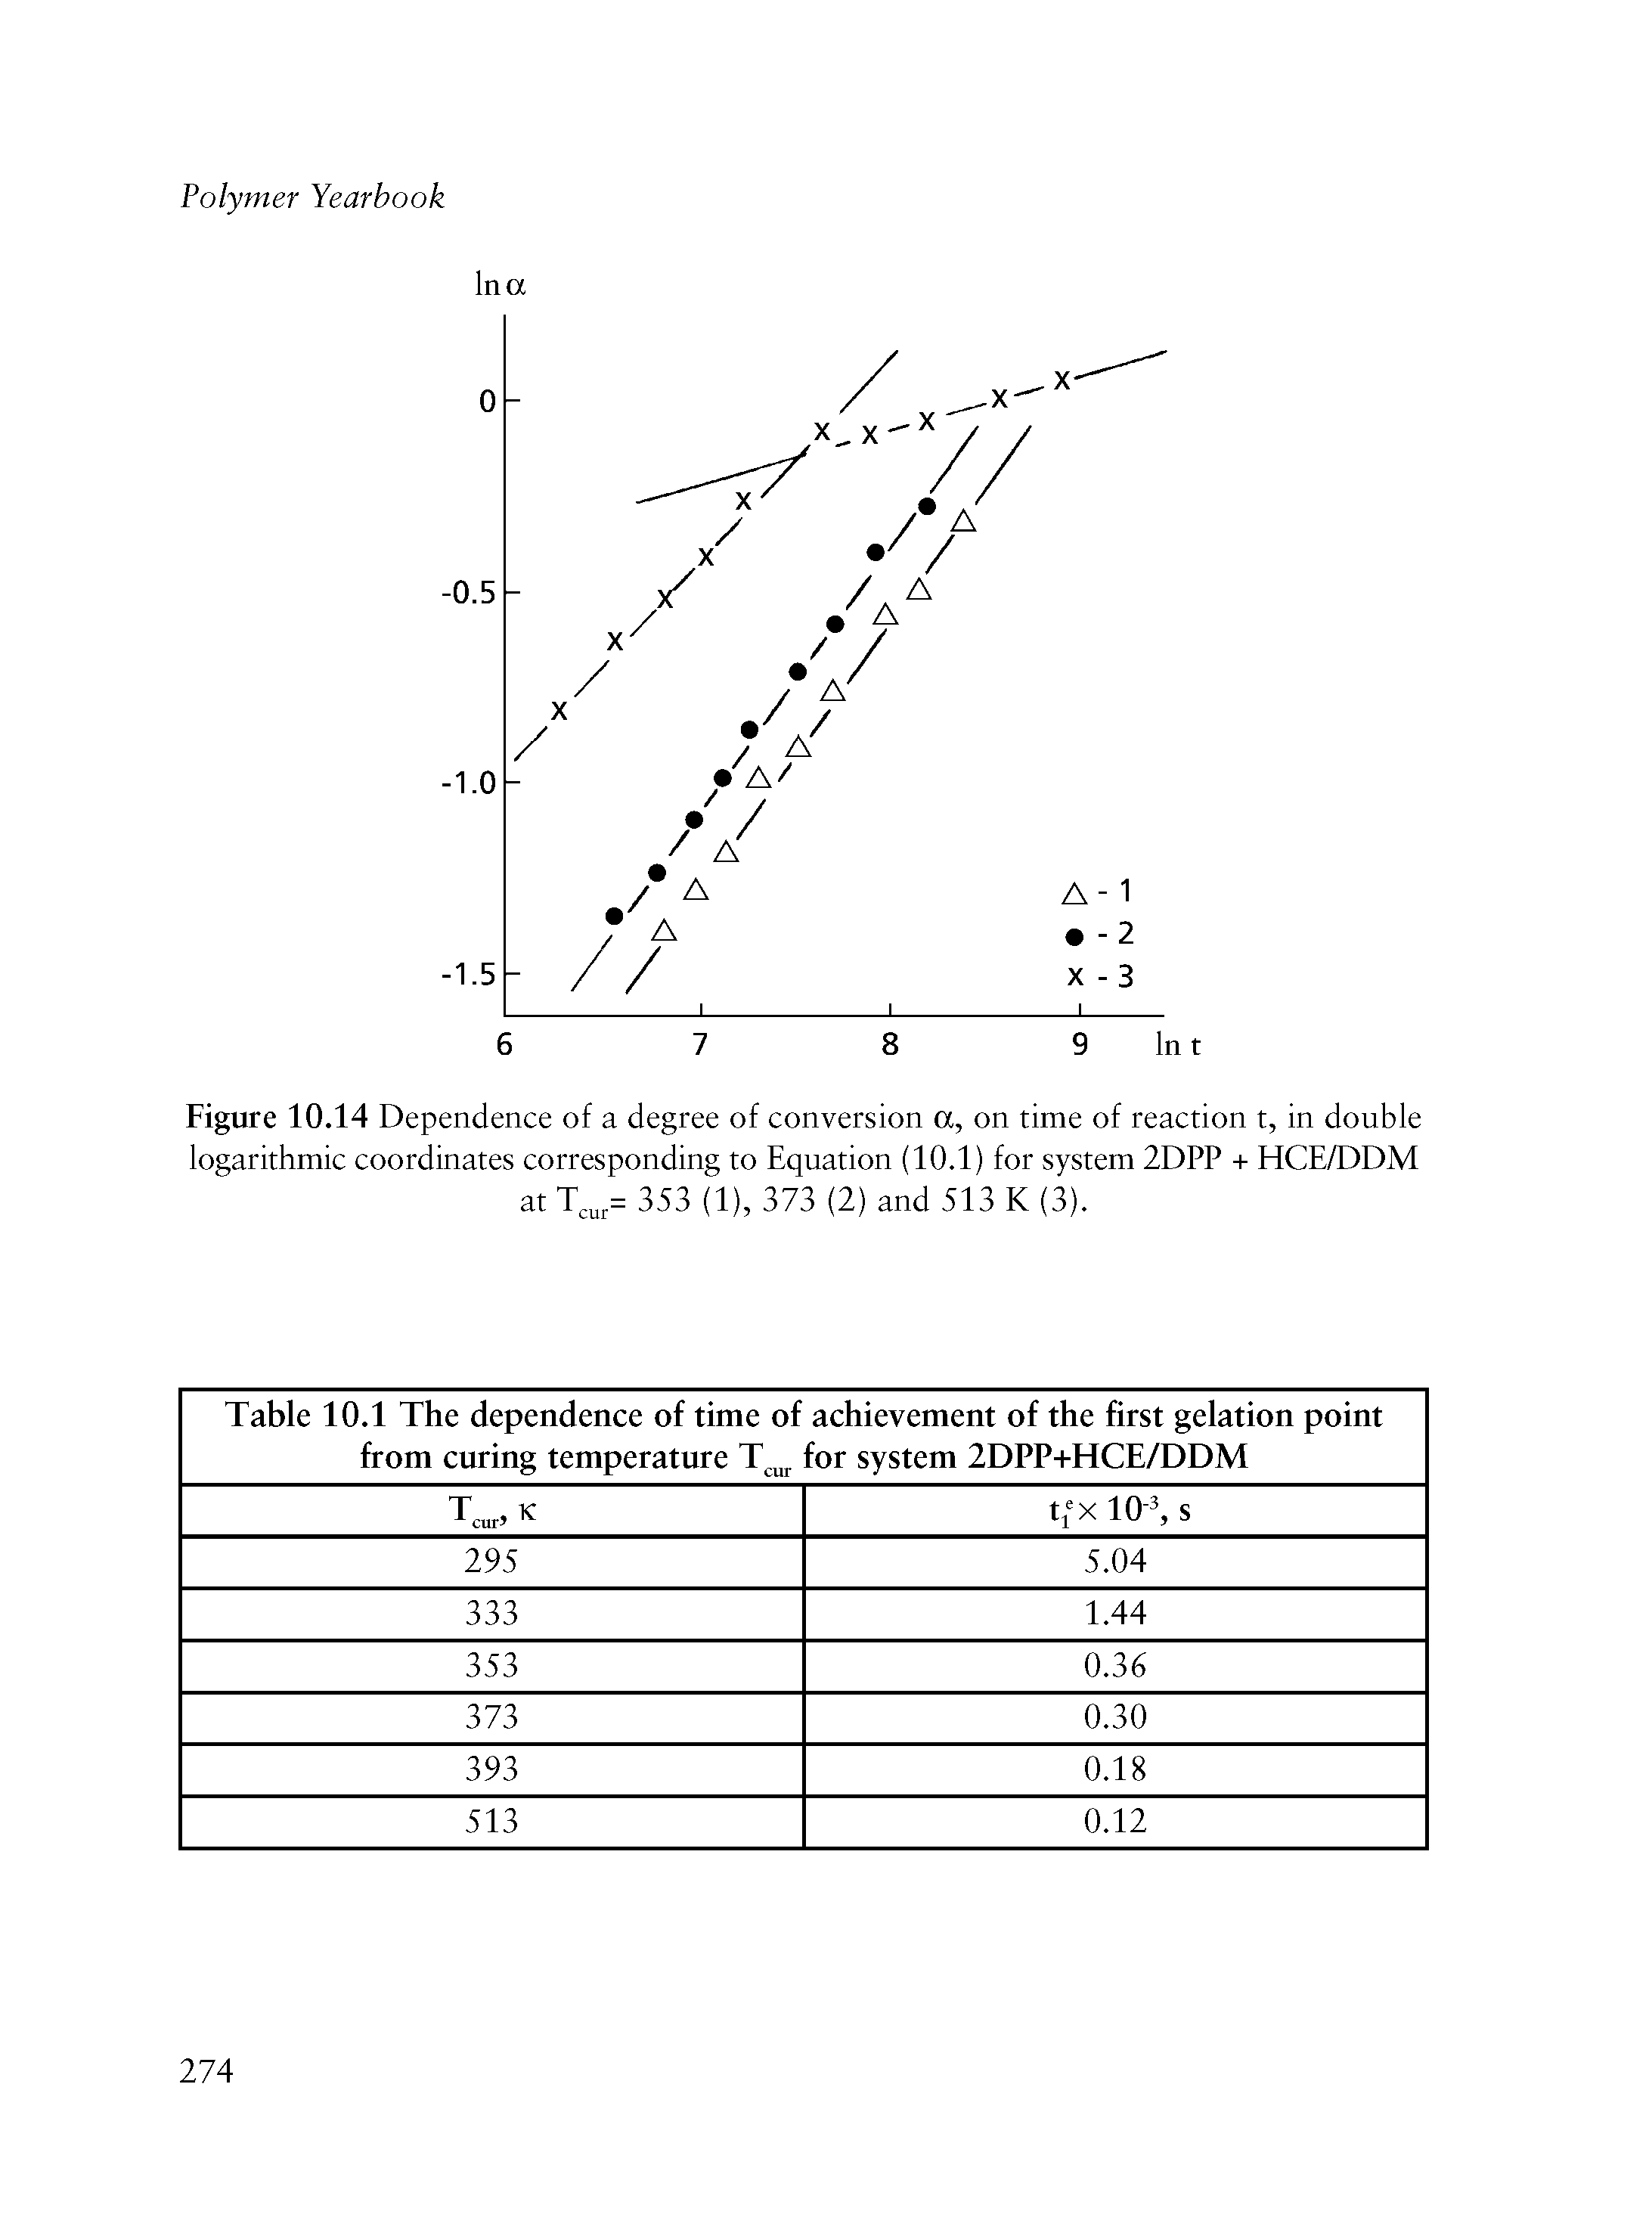 Figure 10.14 Dependence of a degree of conversion a, on time of reaction t, in double logarithmic coordinates corresponding to Equation (10.1) for system 2DPP + HCE/DDM at 353 (1), 373 (2) and 513 K (3).